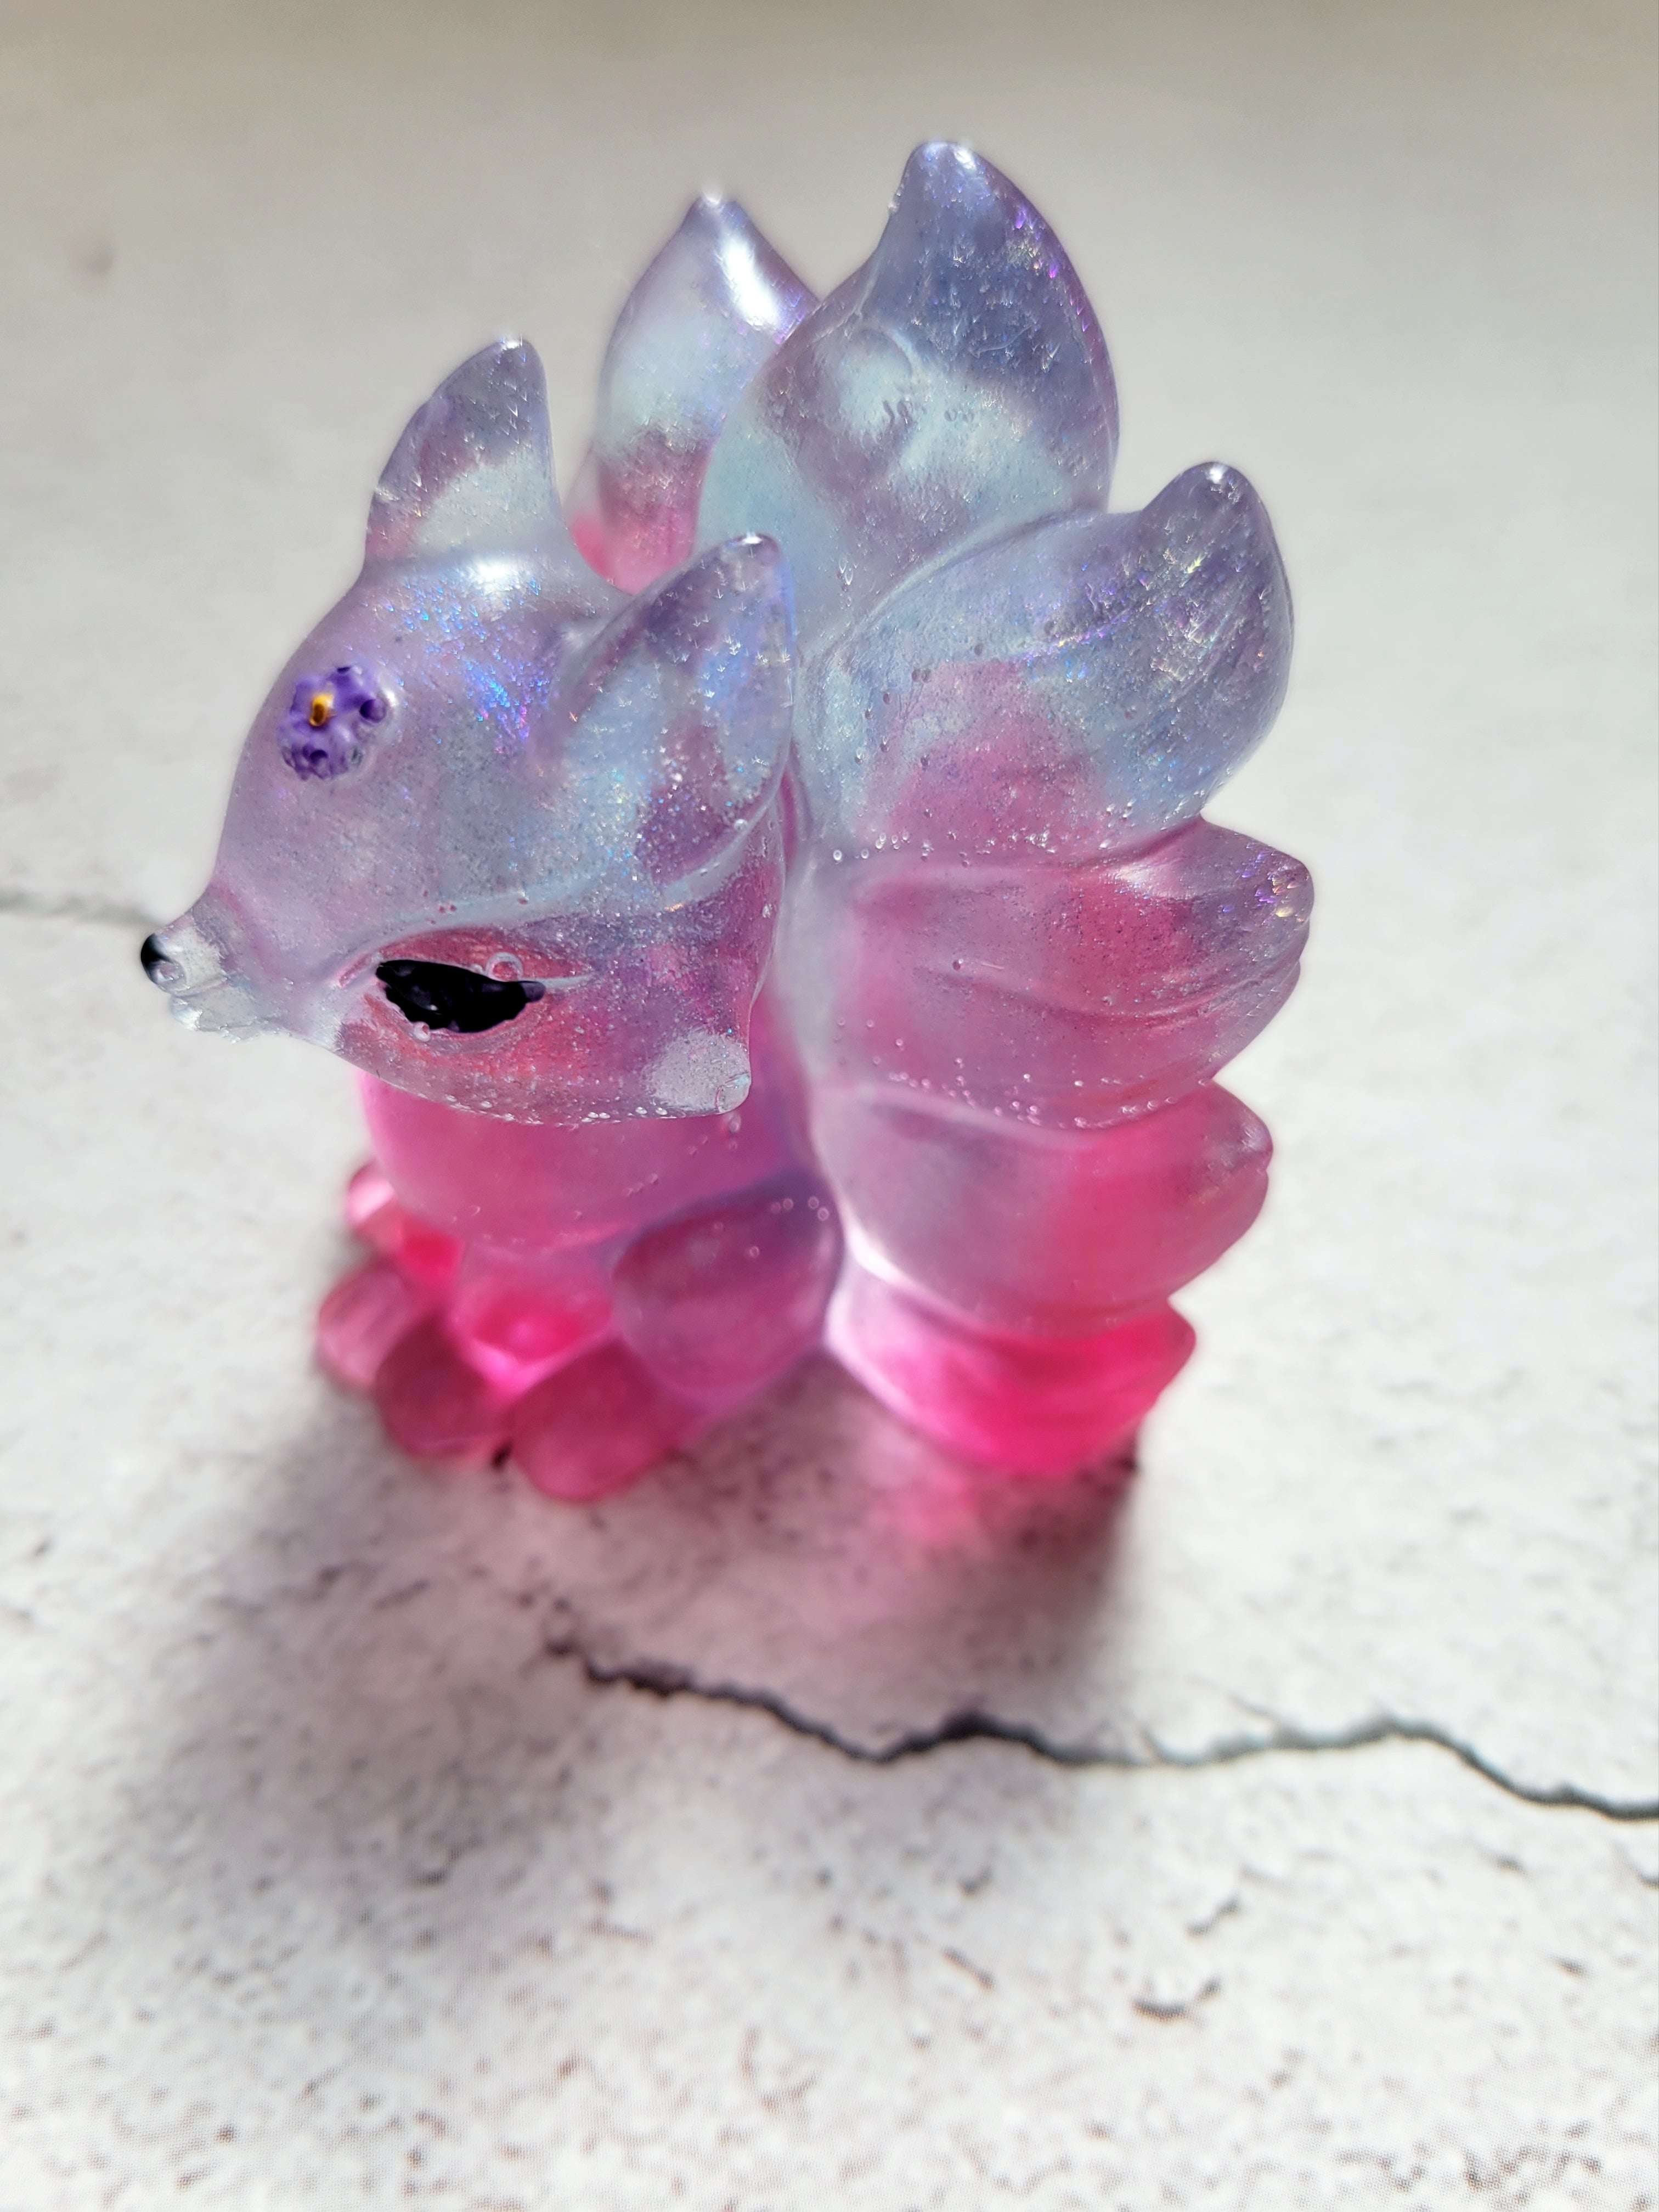 a resin made kitsune fox figure with black painted eyes, purple painted flower on its head. the body is a blend of blue and pink. side view